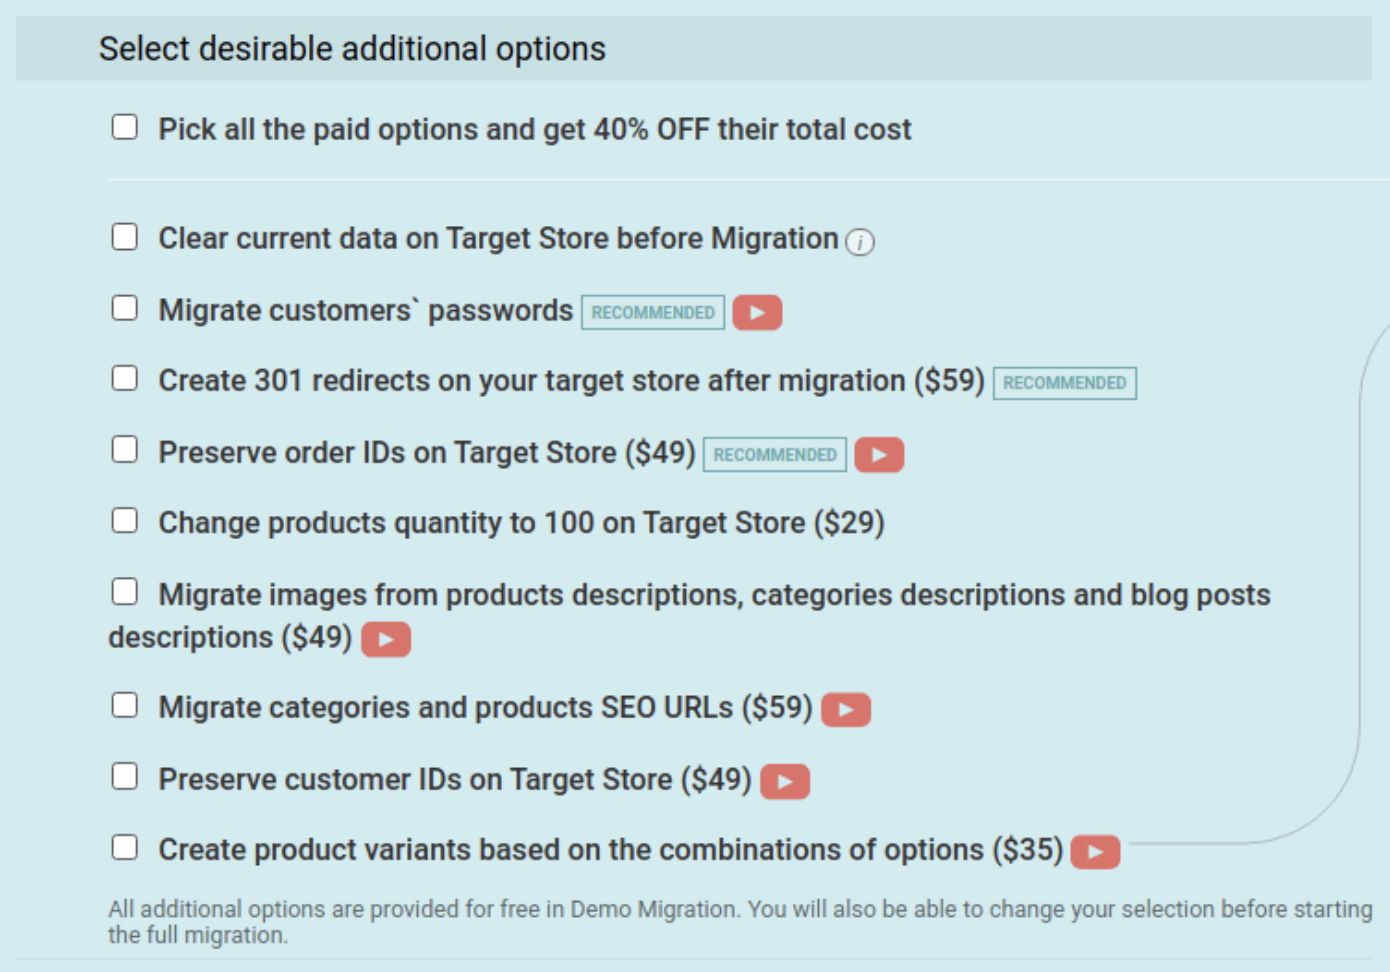 woocommerce to shopify migration